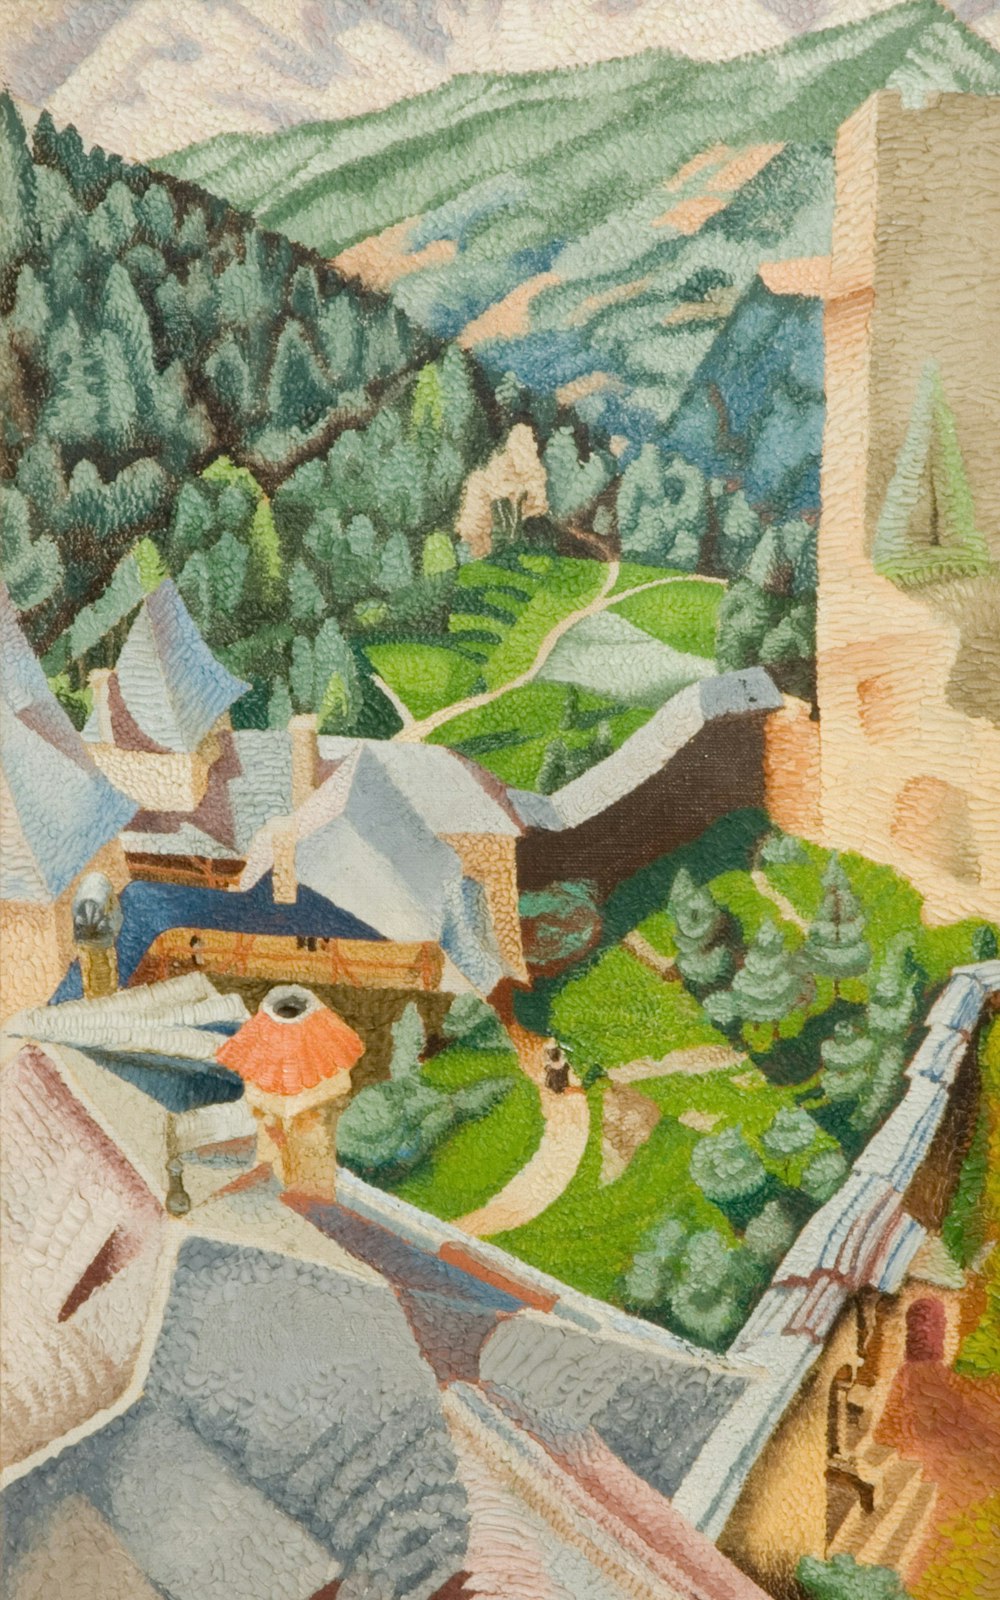 a painting of a village in the mountains